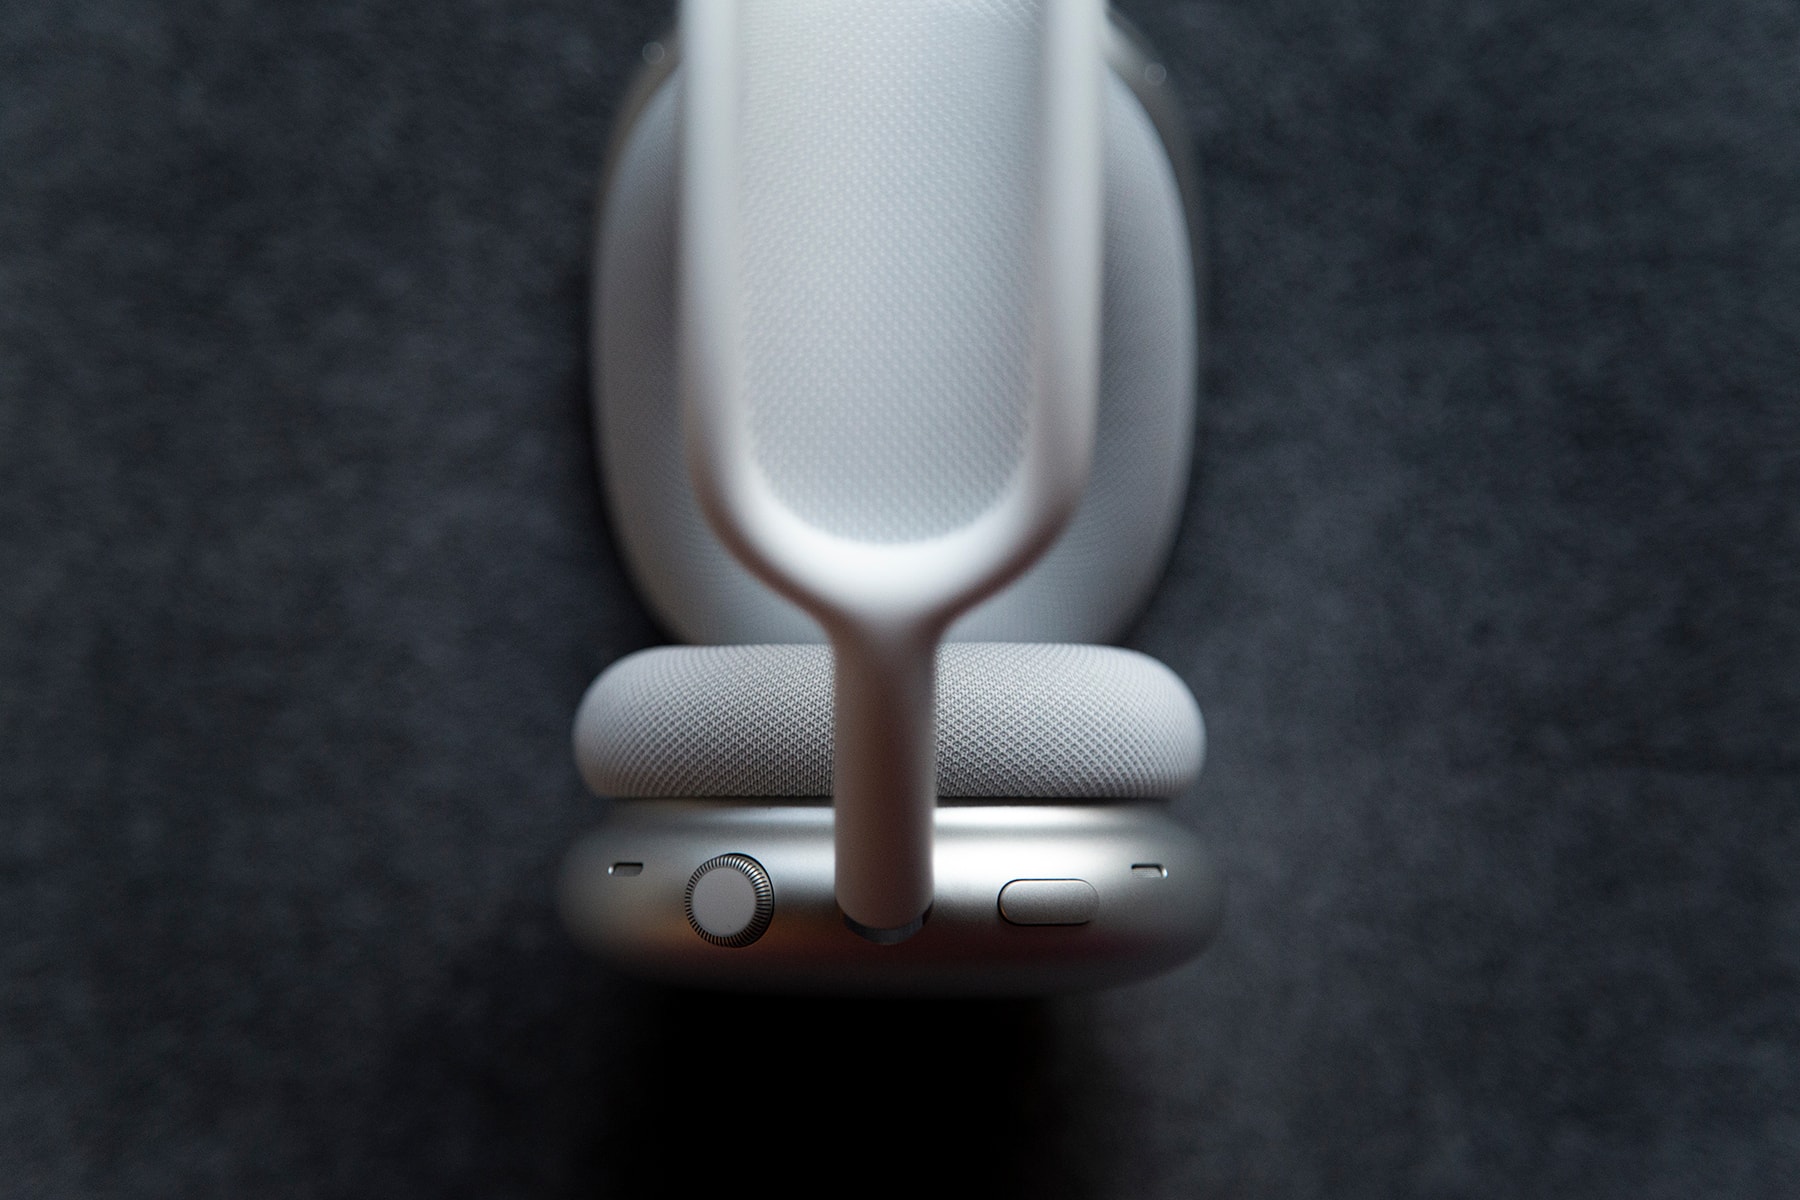 apple airpods max headphones closer look unboxing details price silver over ear review